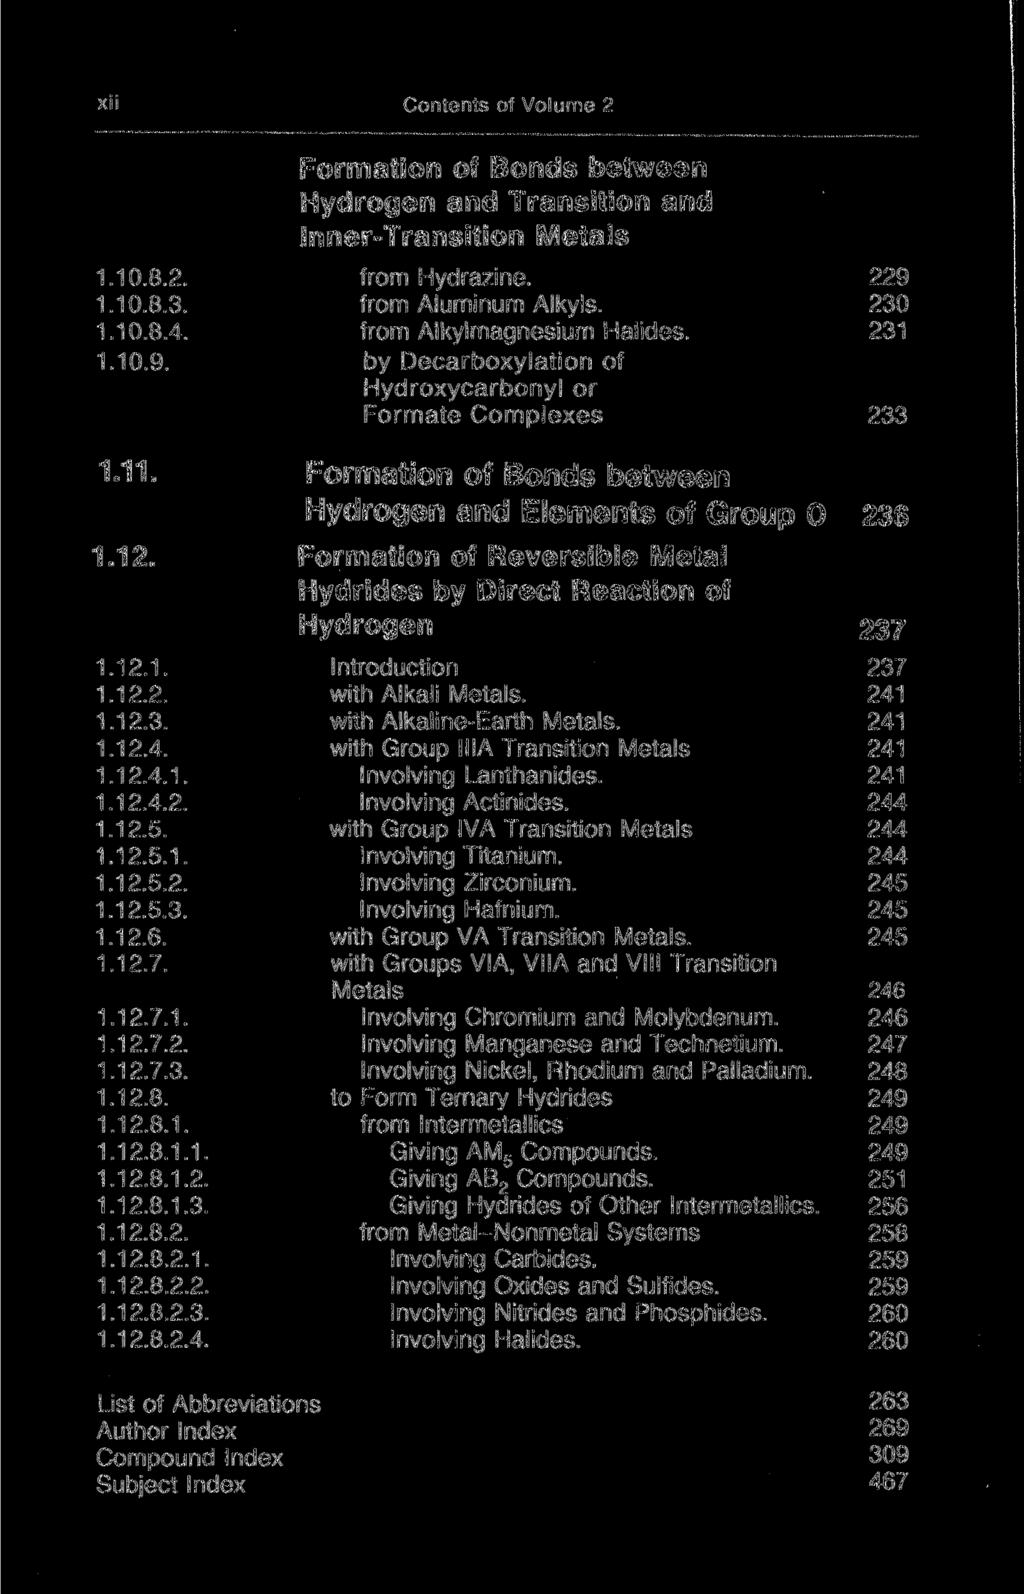 xii Contents of Volume 2 Formation of Bonds between Hydrogen and Transition and Inner-Transition Metals 1.10.8.2. 1.10.8.3. 1.10.8.4. 1.10.9. 1.11. 1.12. 1.12.1. 1.12.2. 1.12.3. 1.12.4. 1.12.4.1. 1.12.4.2. 1.12.5.